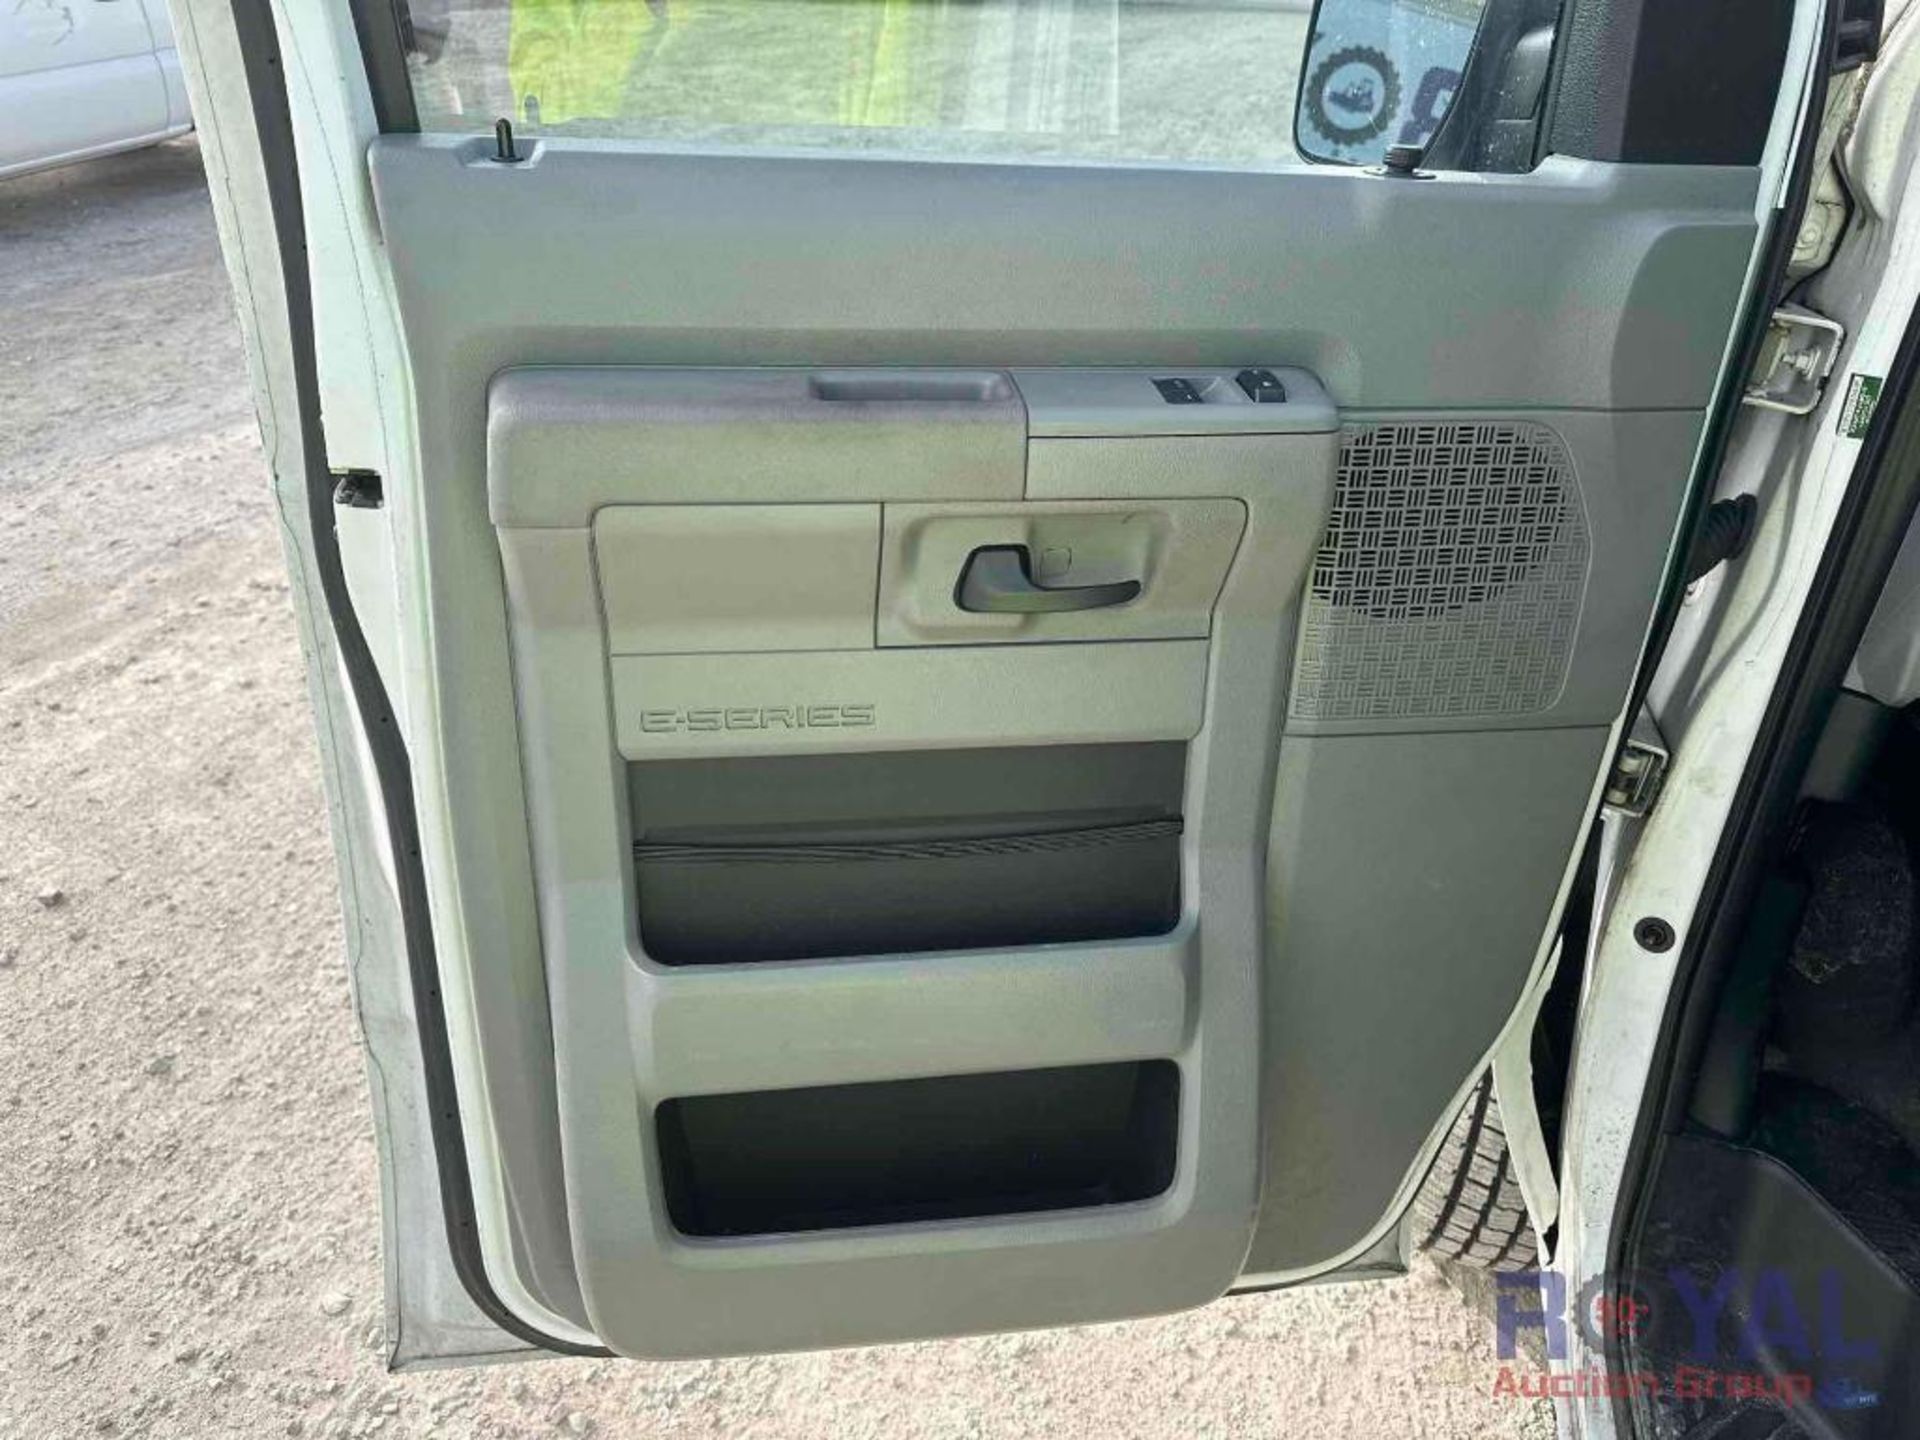 2011 Ford E350 Cargo Van - Image 13 of 27